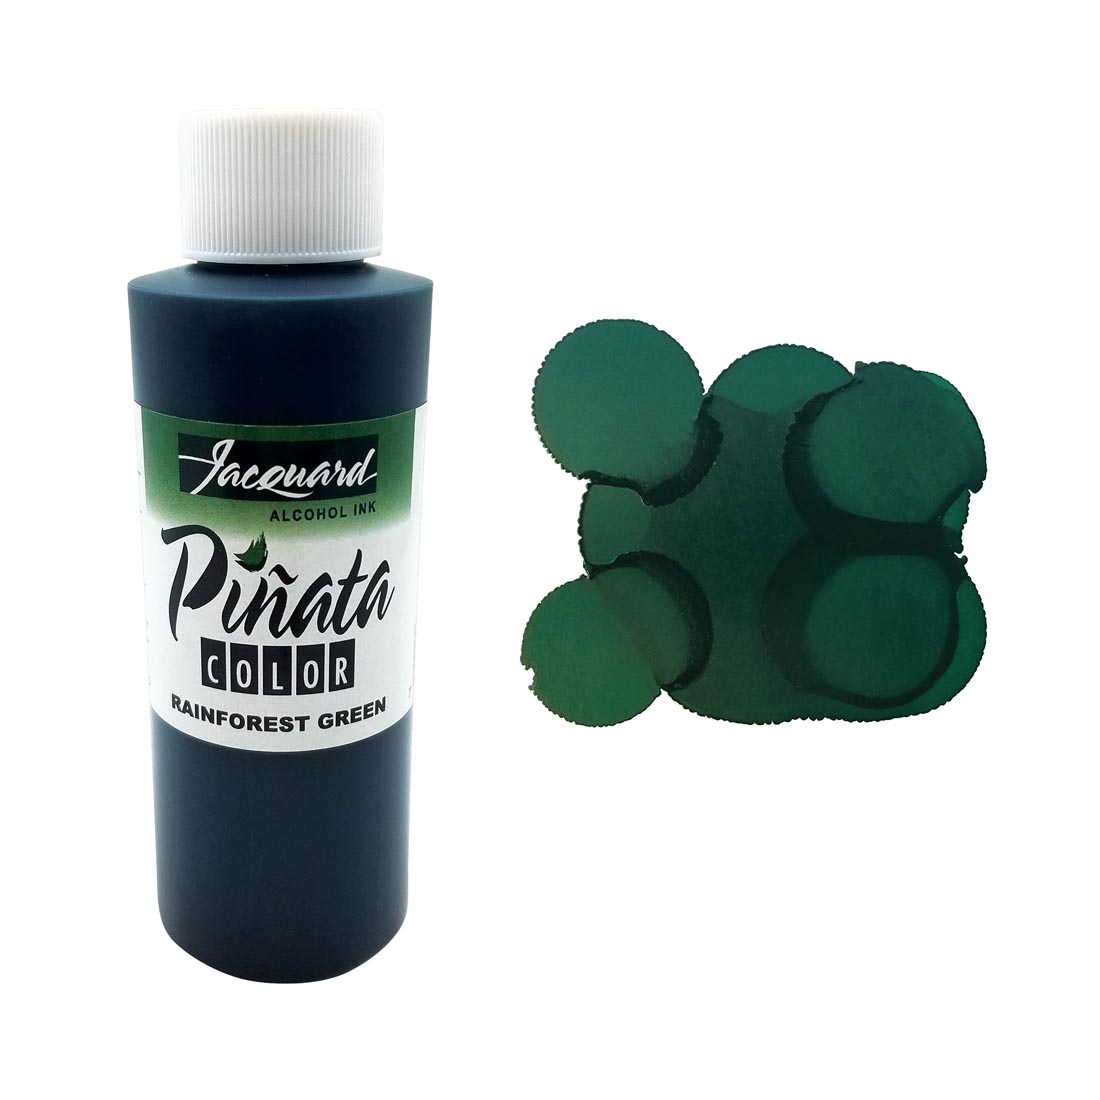 Bottle of Rainforest Green Jacquard Pinata Color Alcohol Ink beside an example color swatch